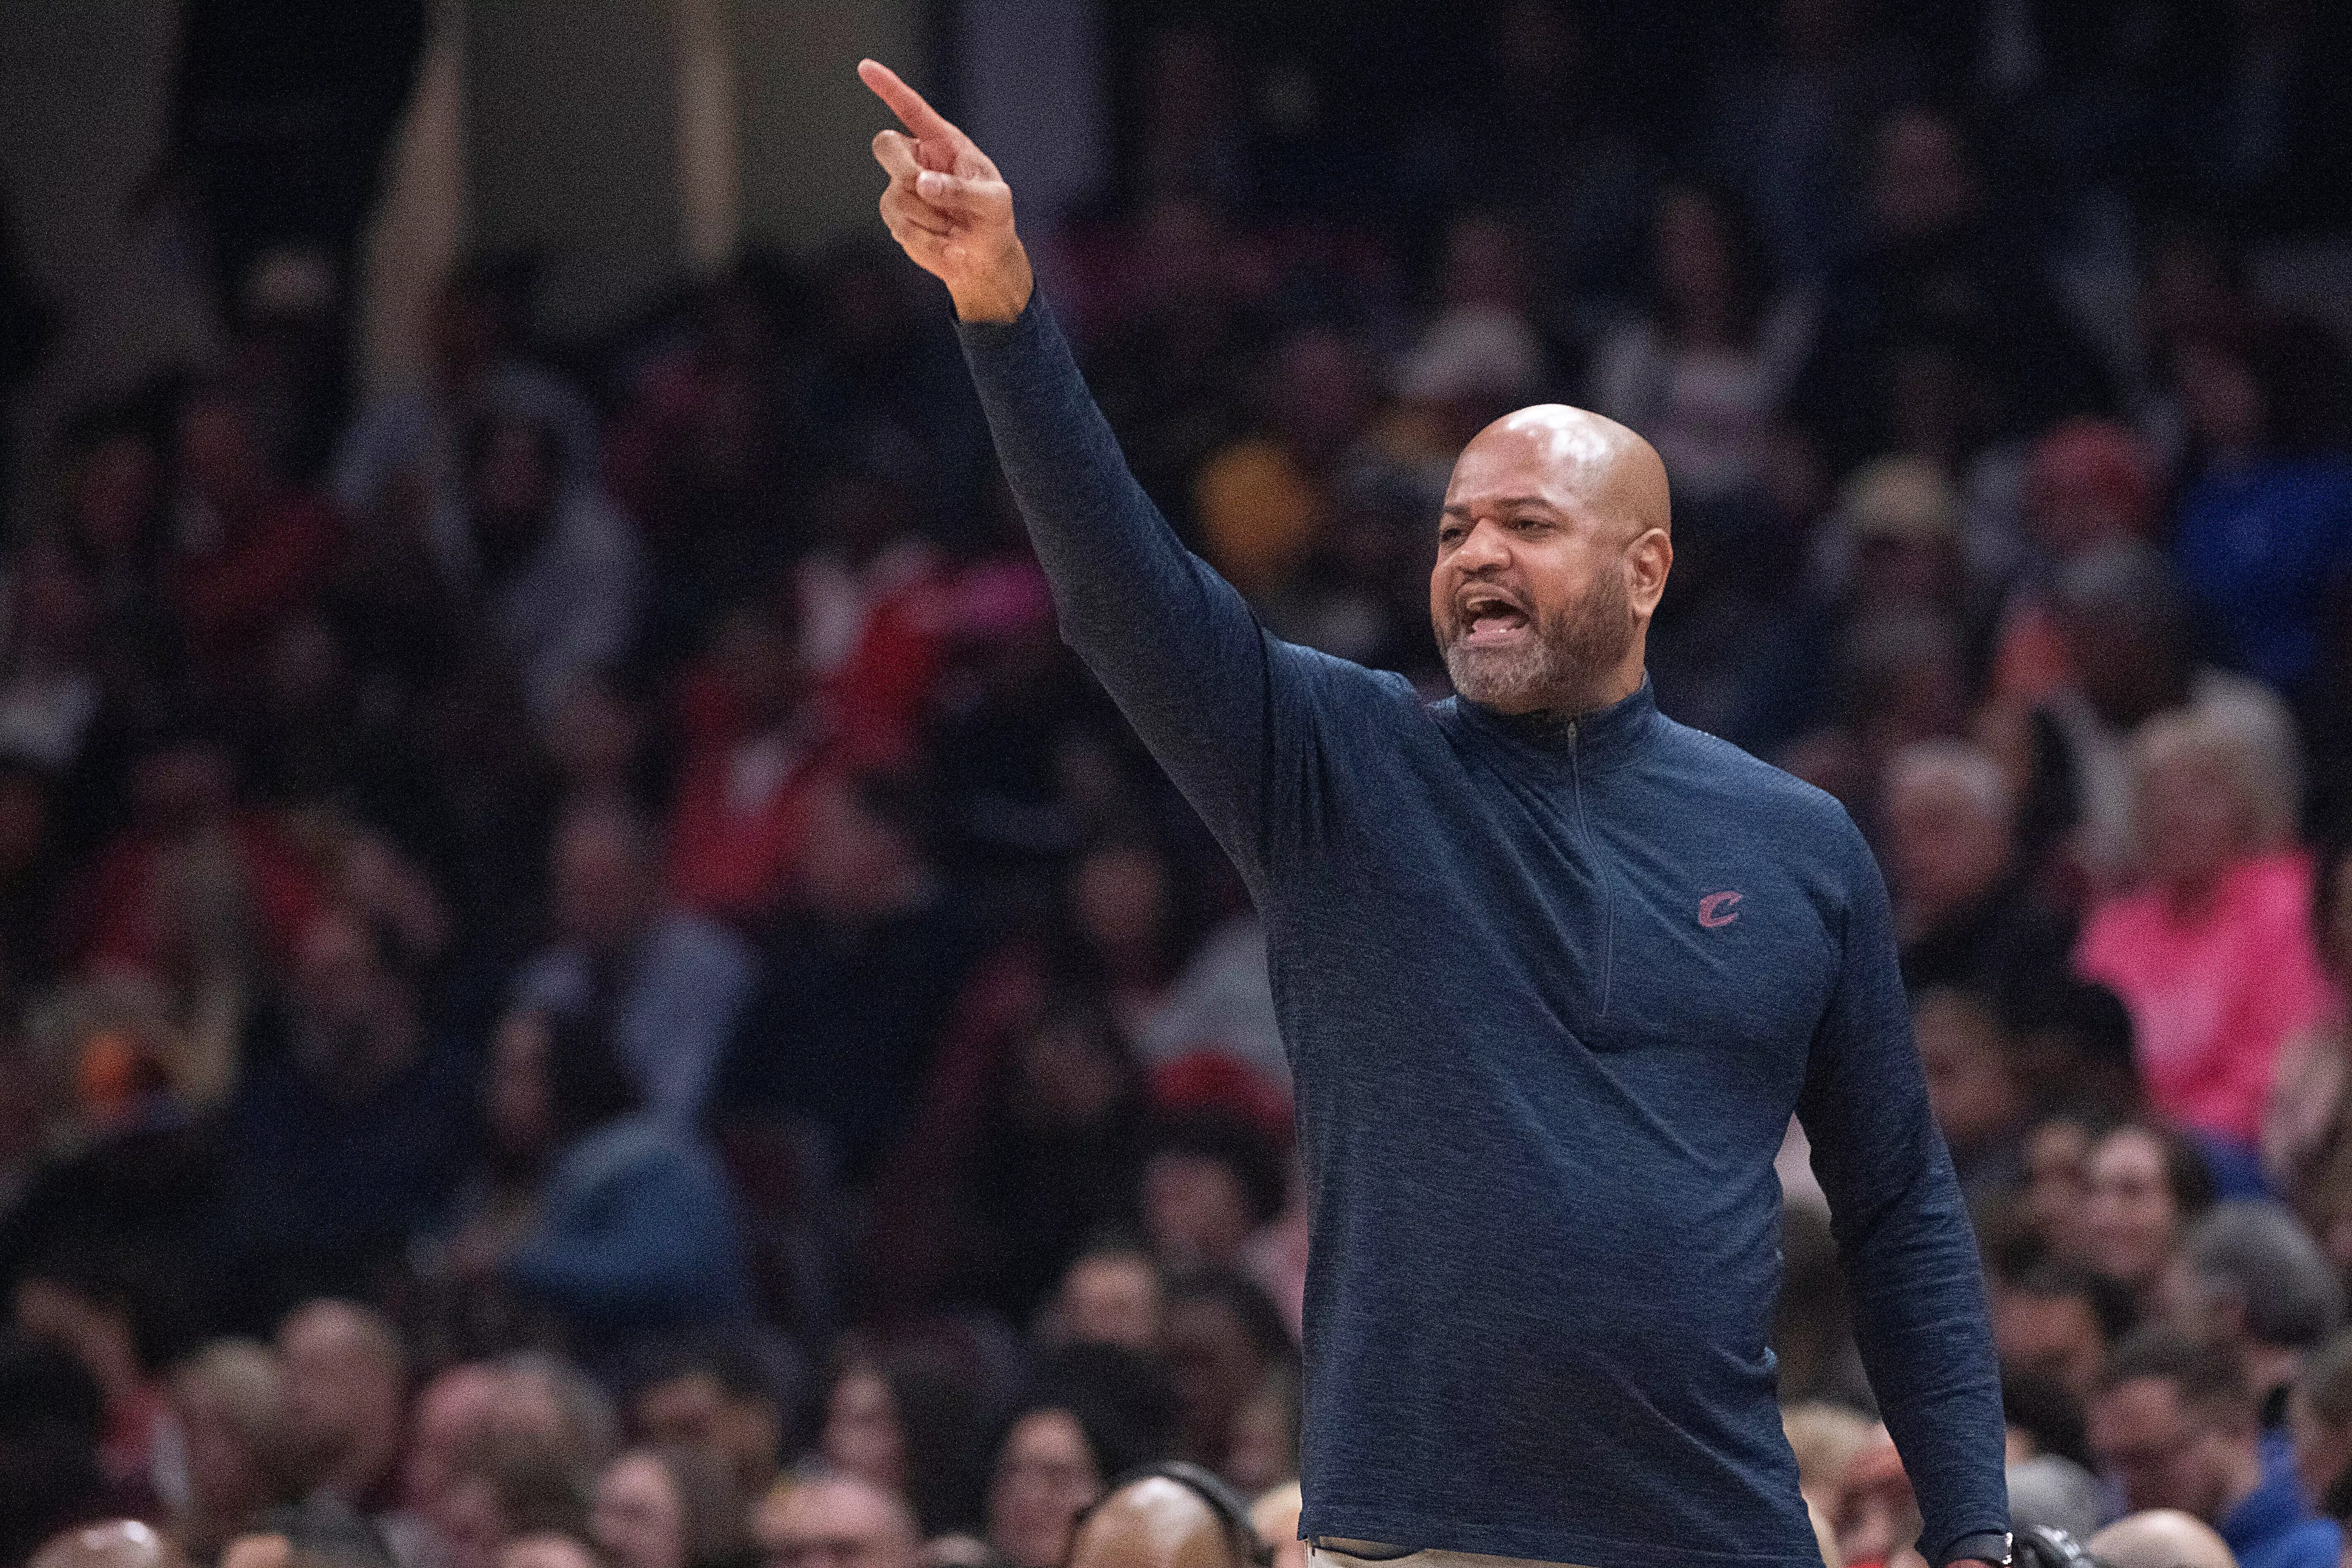 Cleveland Cavaliers head coach J.B. Bickerstaff directs the team against the Chicago Bulls during the first half Wednesday in Cleveland.